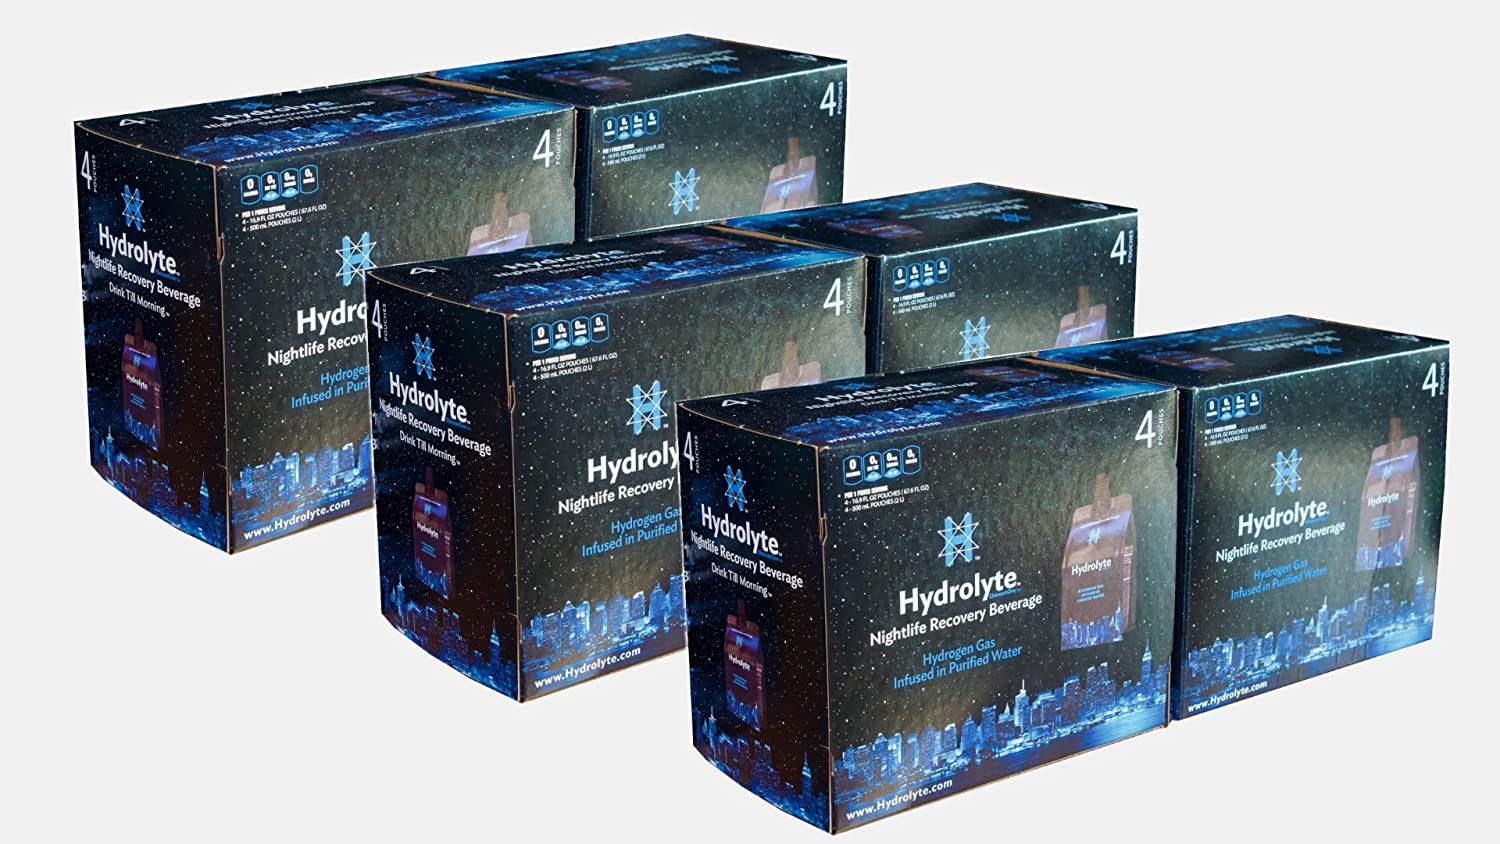 ElementOne Hydrolyte Nightlife Recovery Beverage 6x 4 Pack Weekender 24 Pouches Total Hydrogen Gas and Electrolytes Infused in Purified Water in a Pouch